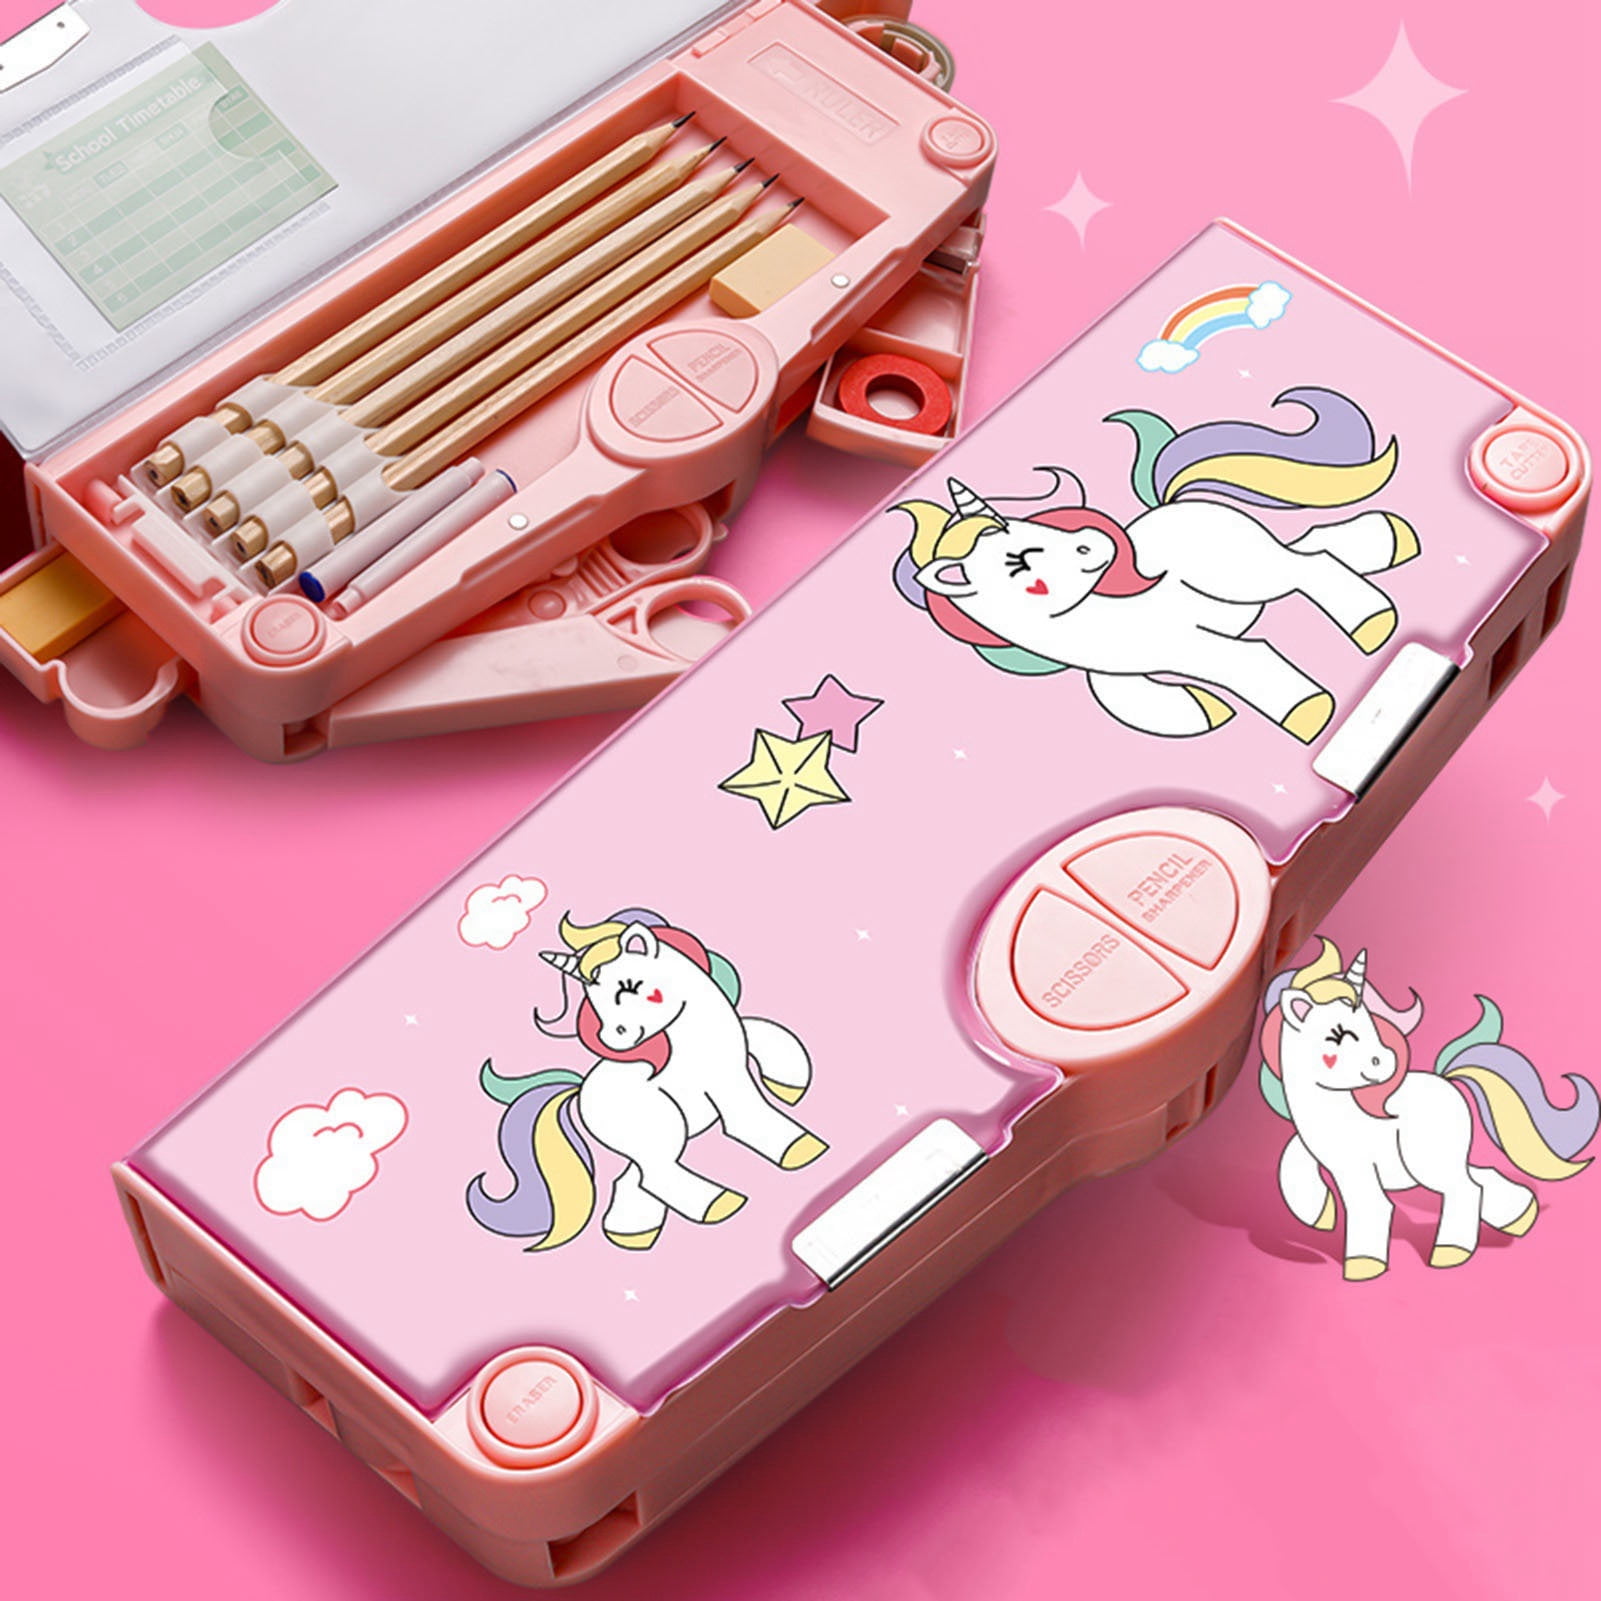 Ipidipi Toys Pop Up Unicorn Pencil Case for Kids, Multifunction Stationery Organizer Box with Calculator, Sharpener, and Pencils, Cute School Supplies, Best